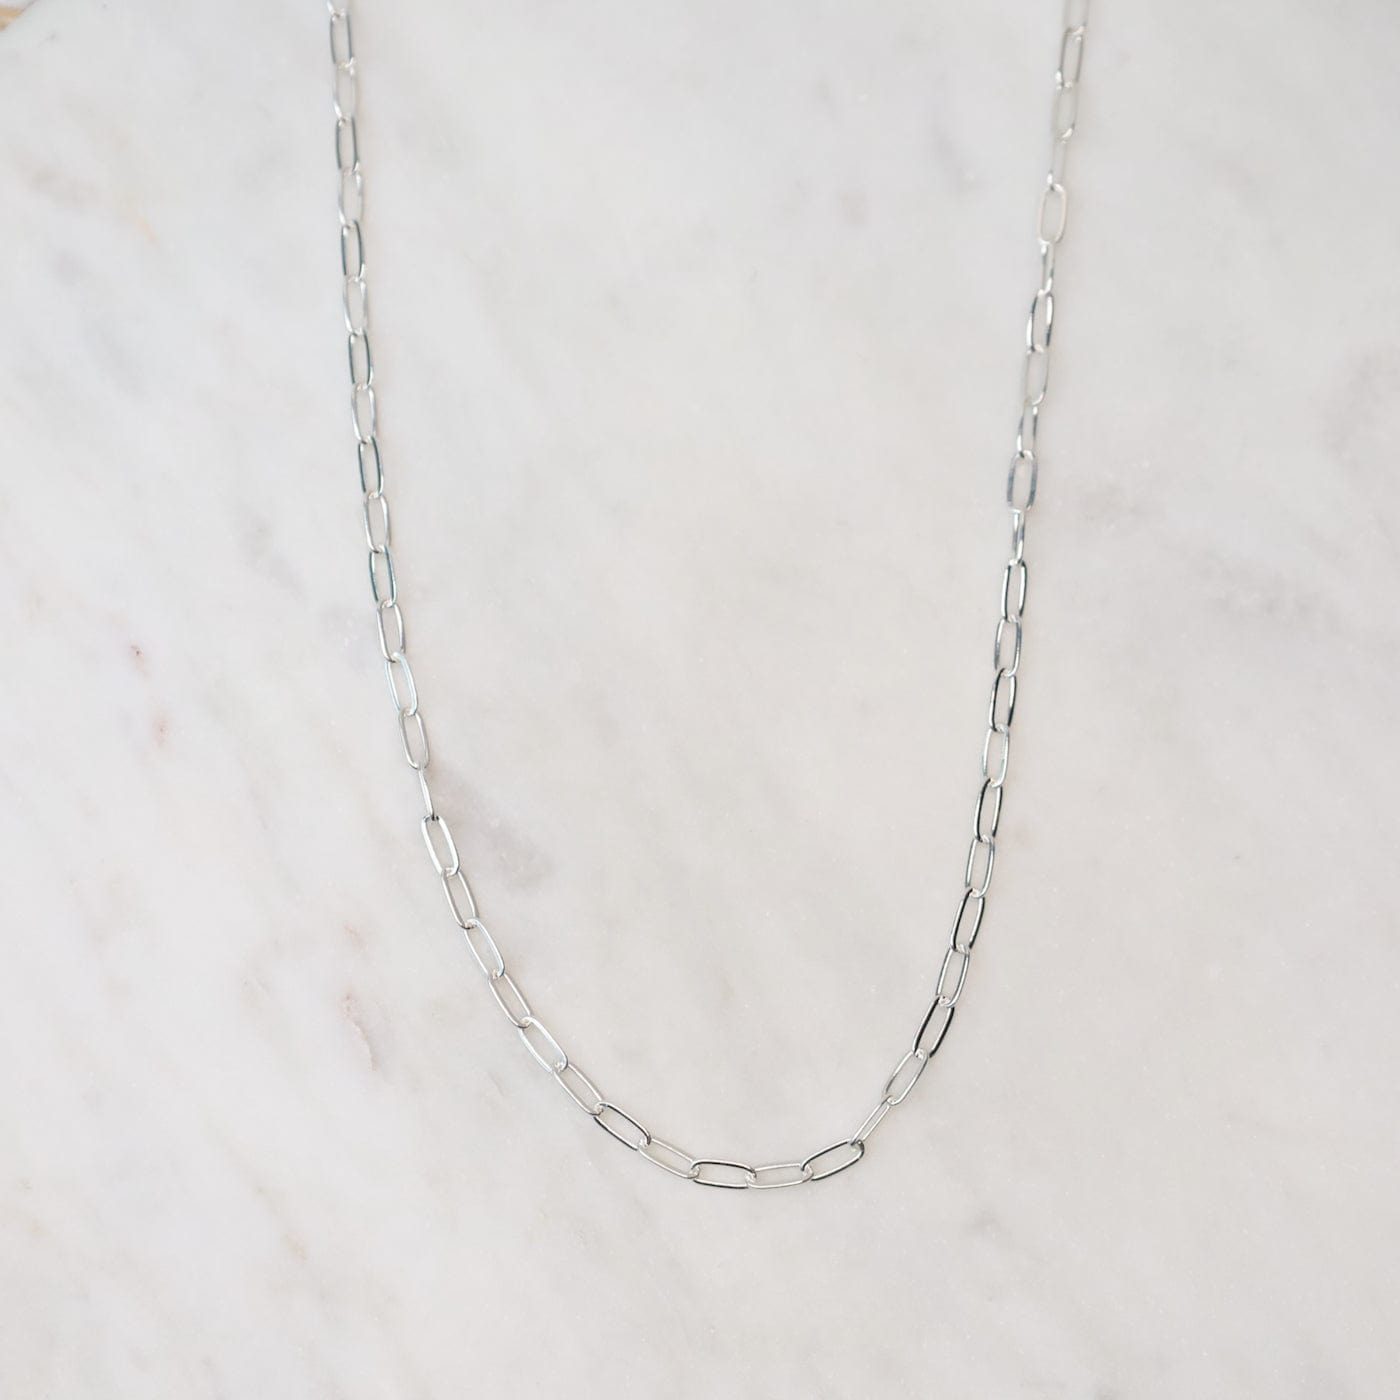 NKL 24" Sterling Silver Flat Drawn Cable Chain